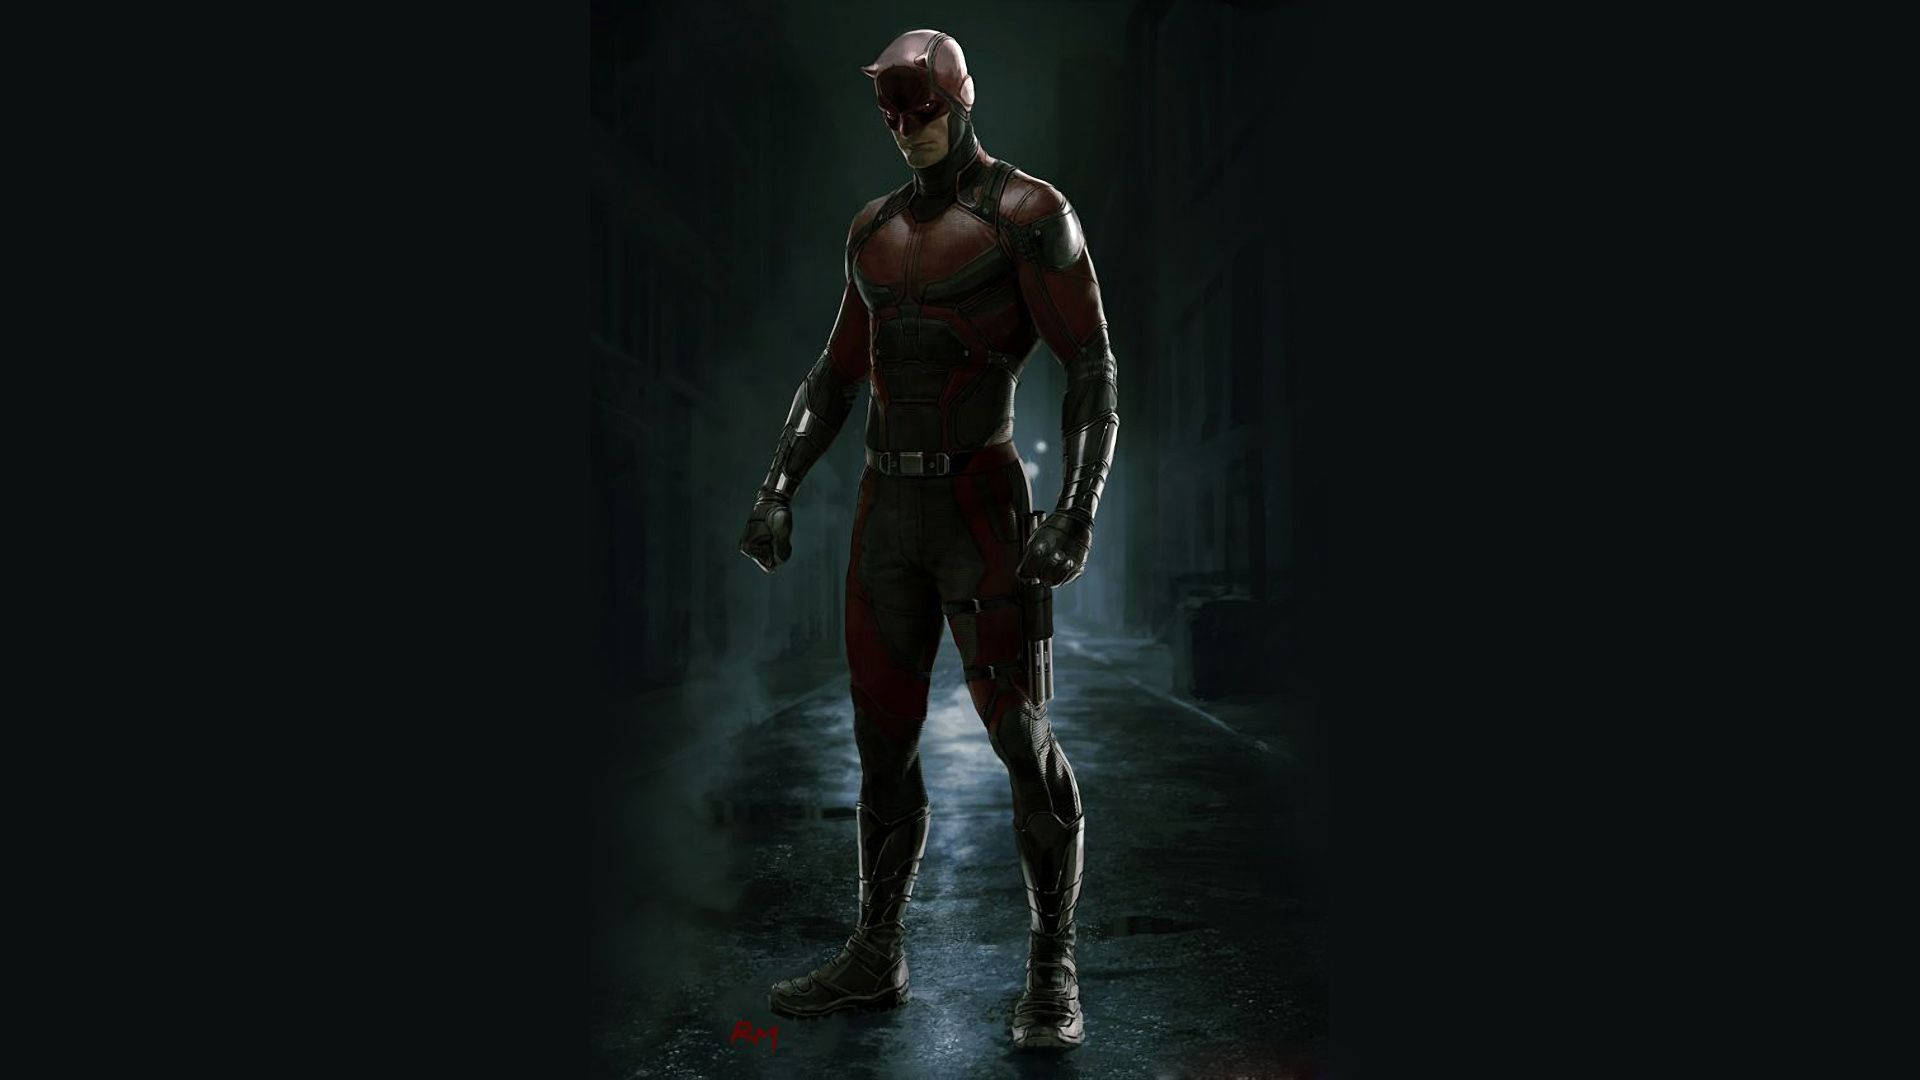 Daredevil Standing In A Dimly Lit Alley Wallpaper